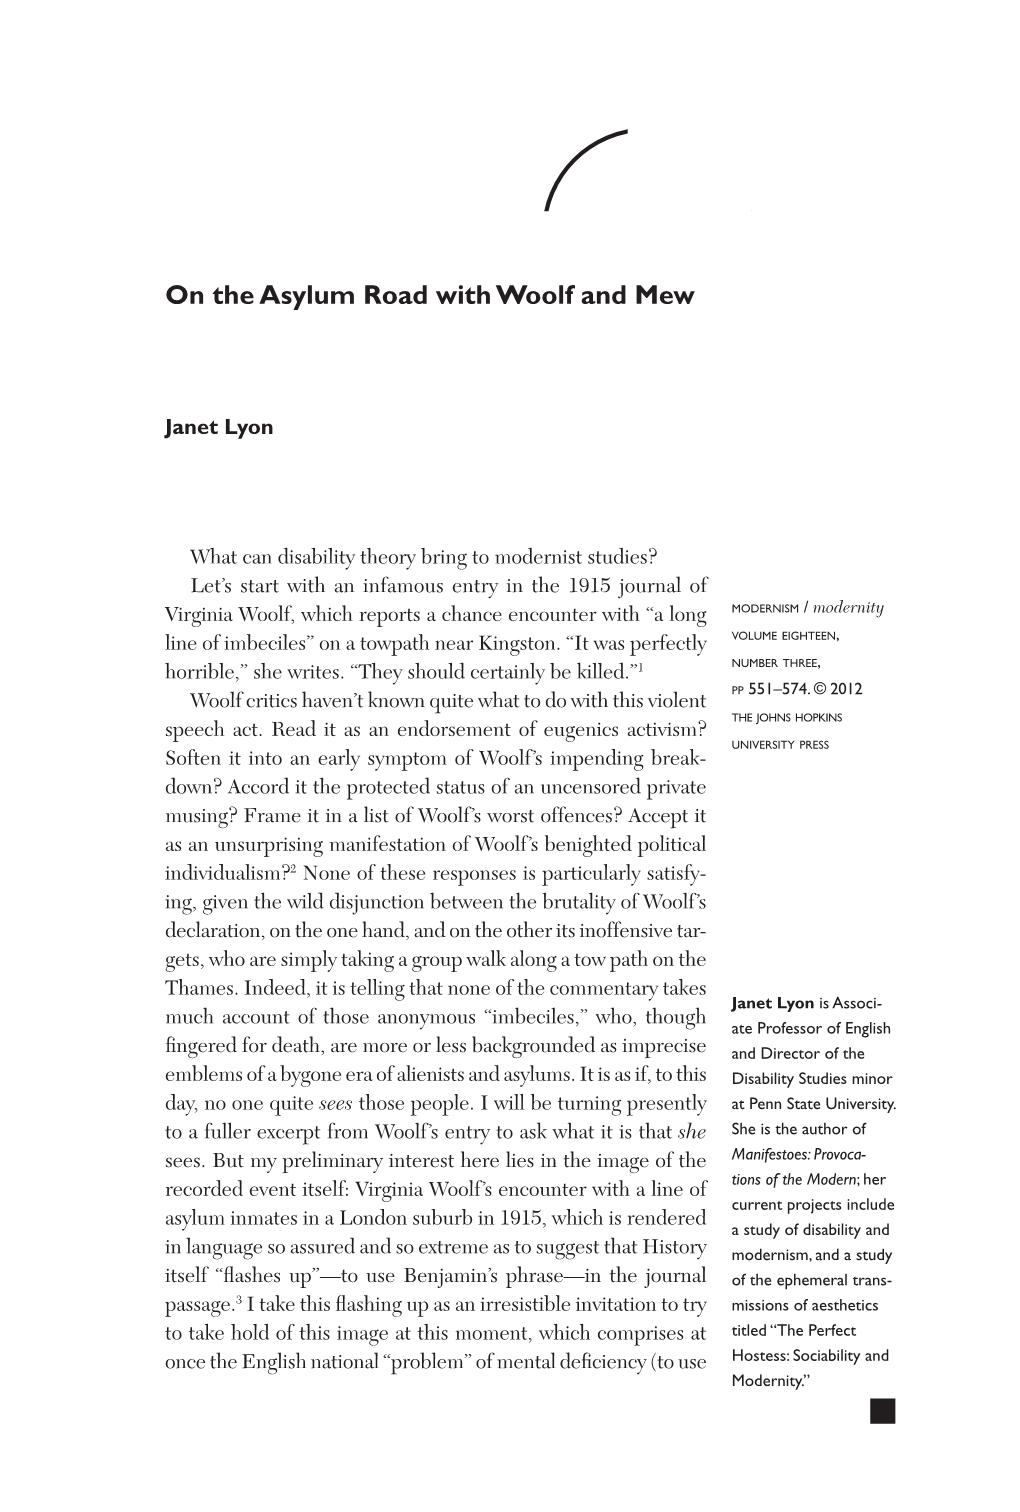 Janet Lyon, “On the Asylum Road with Woolf and Mew”